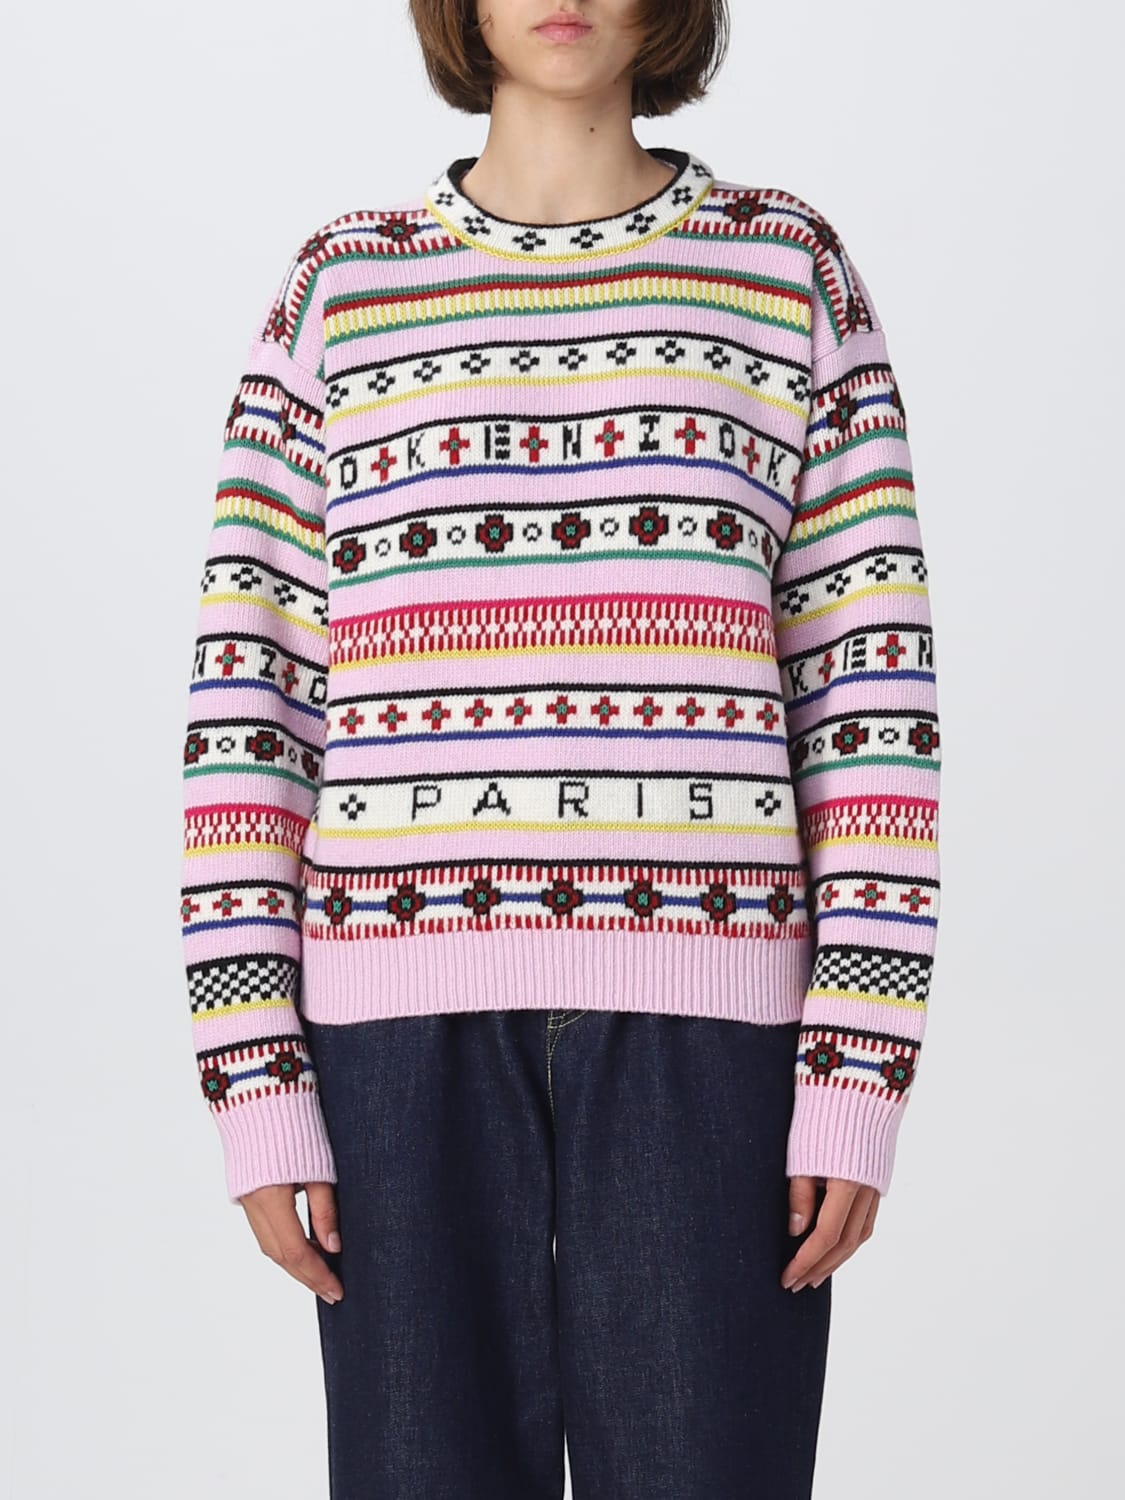 Bange for at dø F.Kr. Sprede Kenzo Outlet: sweater for woman - Multicolor | Kenzo sweater FC62PU3173CH  online at GIGLIO.COM